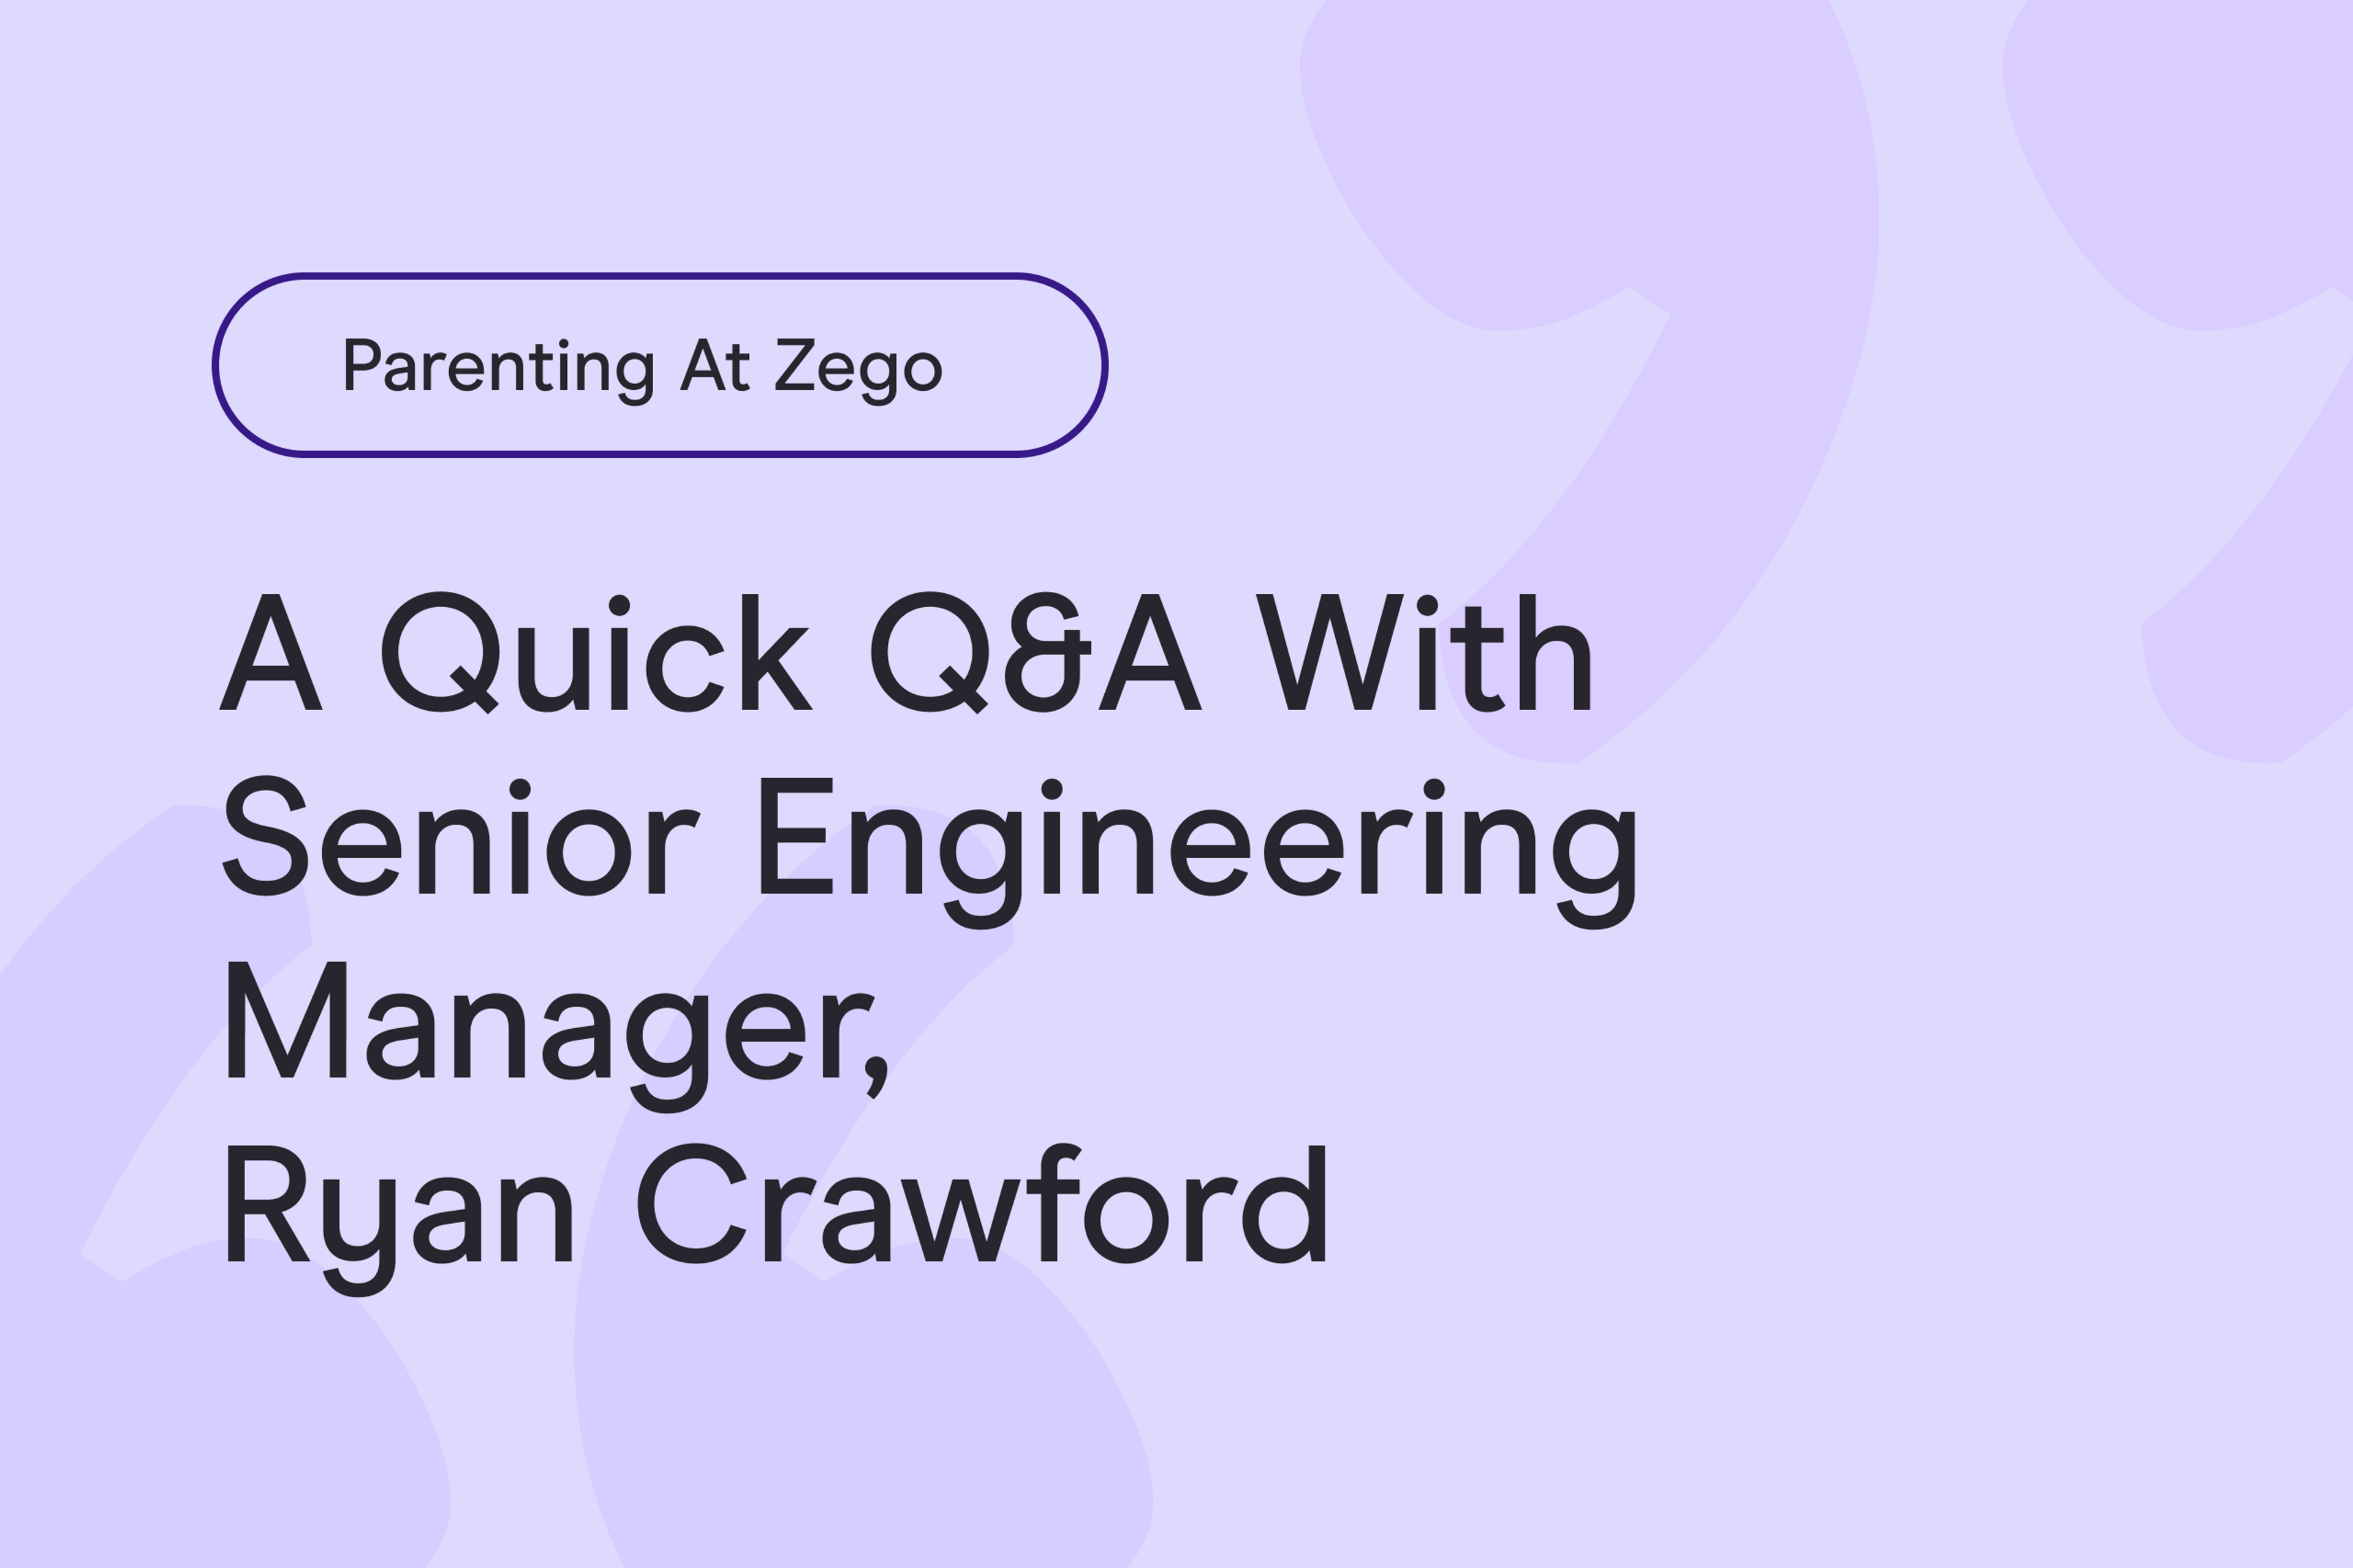 Parenting at Zego: a quick Q&A with Senior Engineering Manager, Ryan Crawford